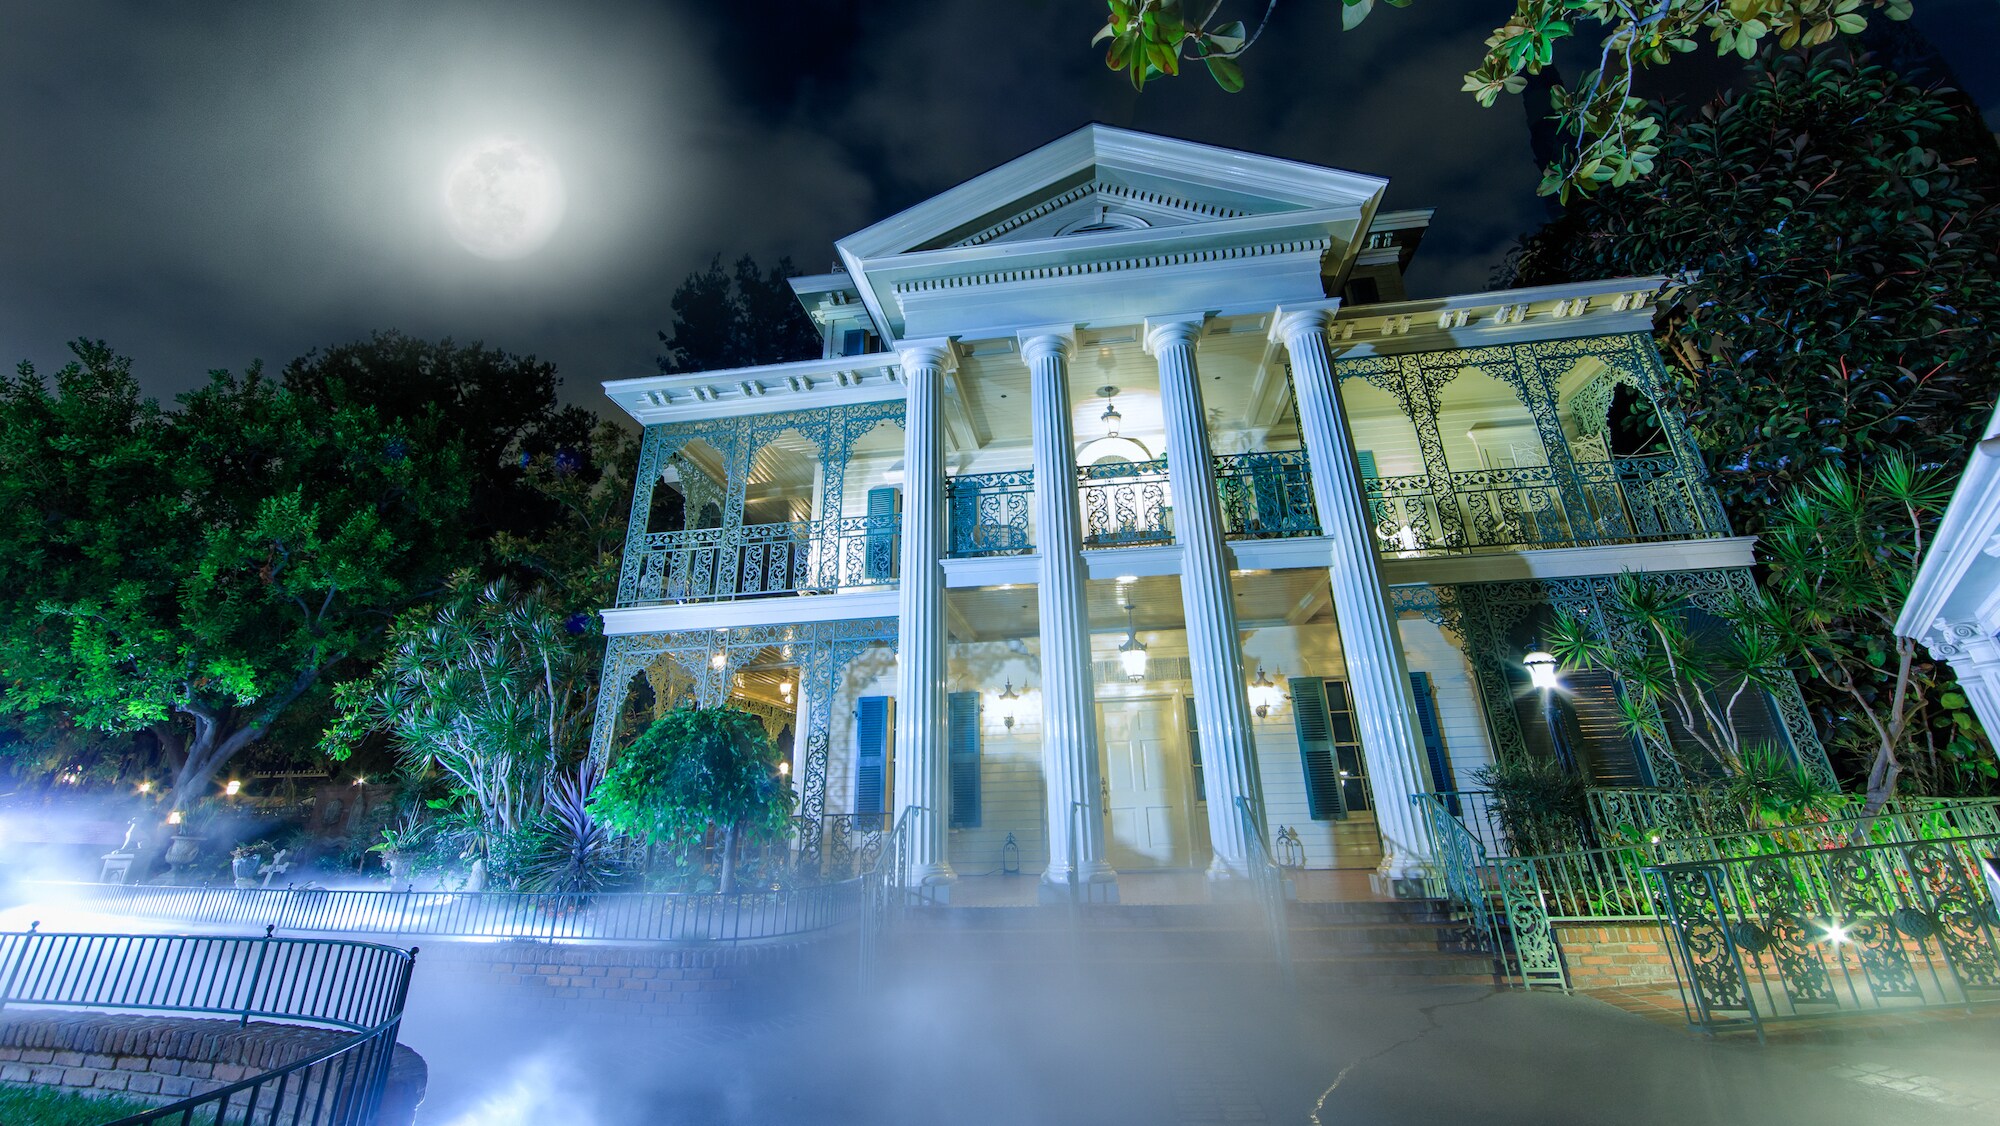 Image of the Haunted Mansion exterior at night.